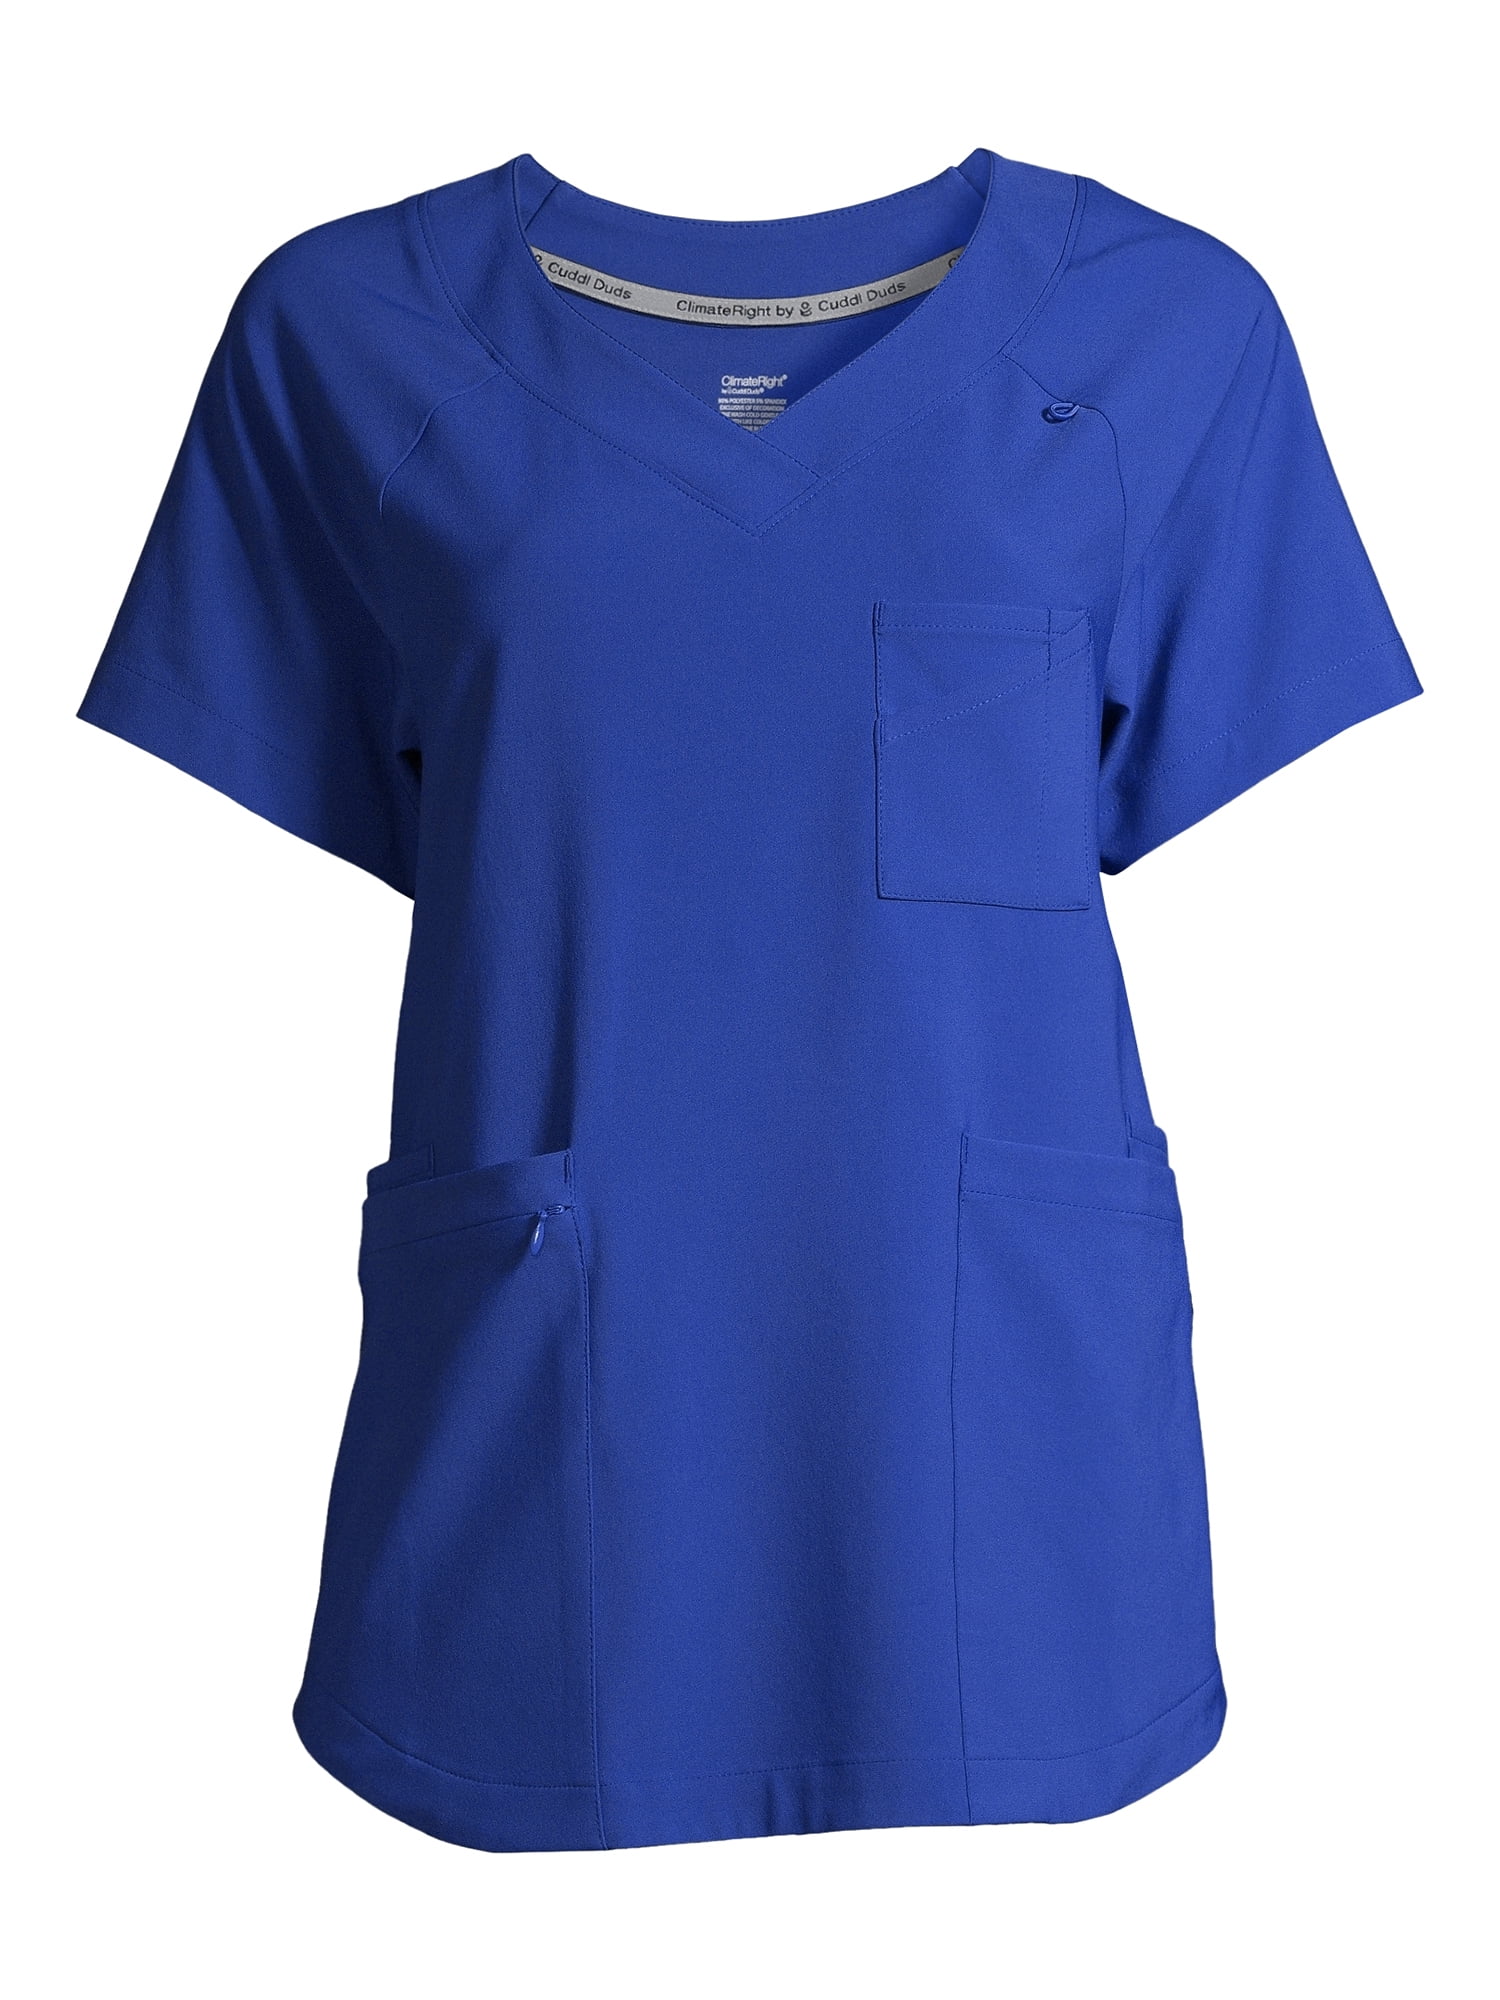 ClimateRight by Cuddl Duds Short Sleeve V-Neck Scrub Top (Women's